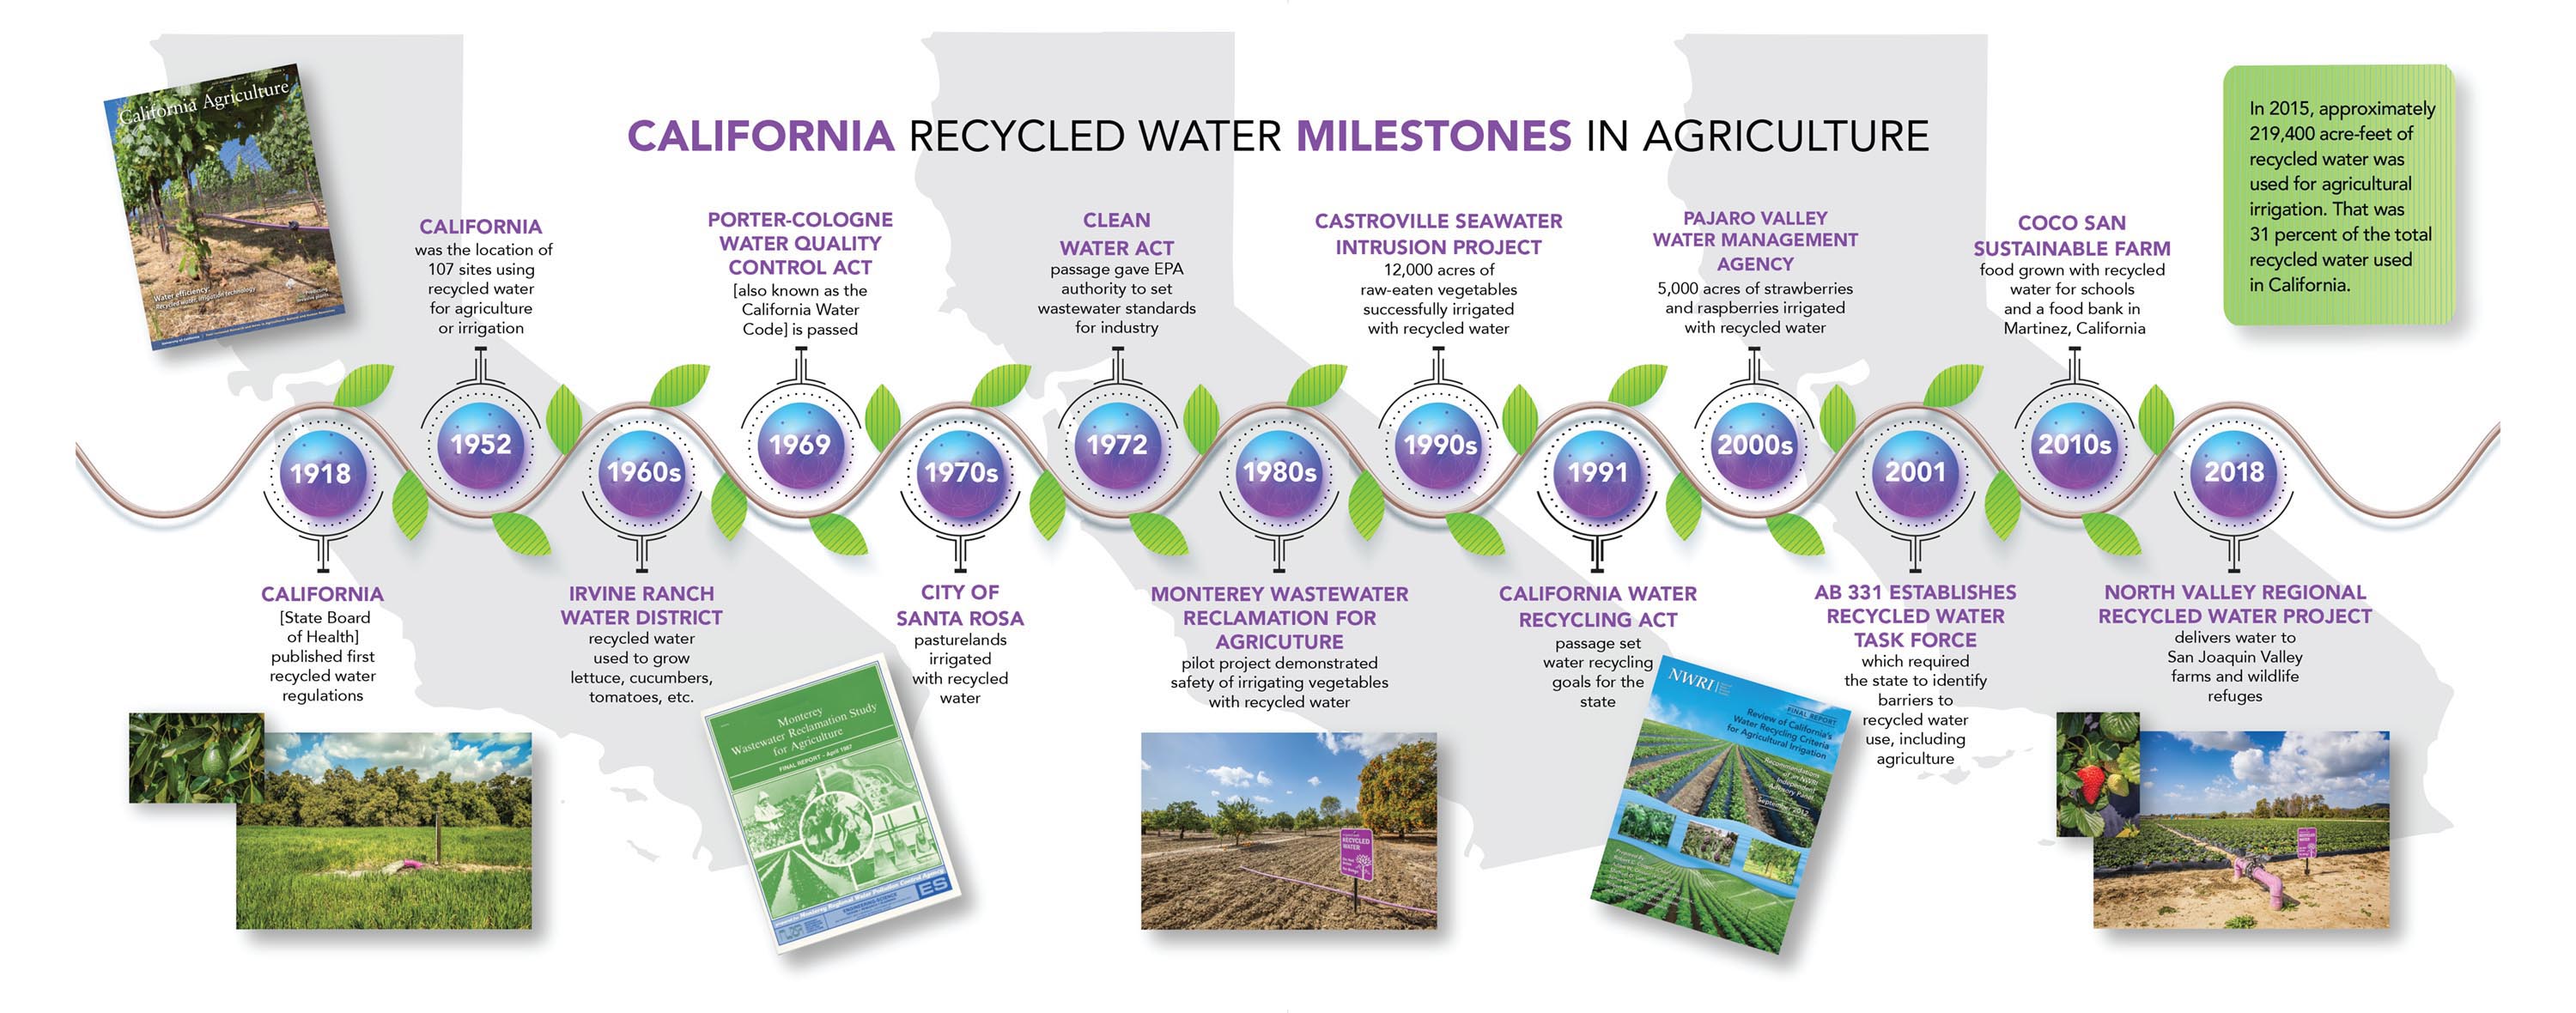 3000x1180 california recycled water milestones poster